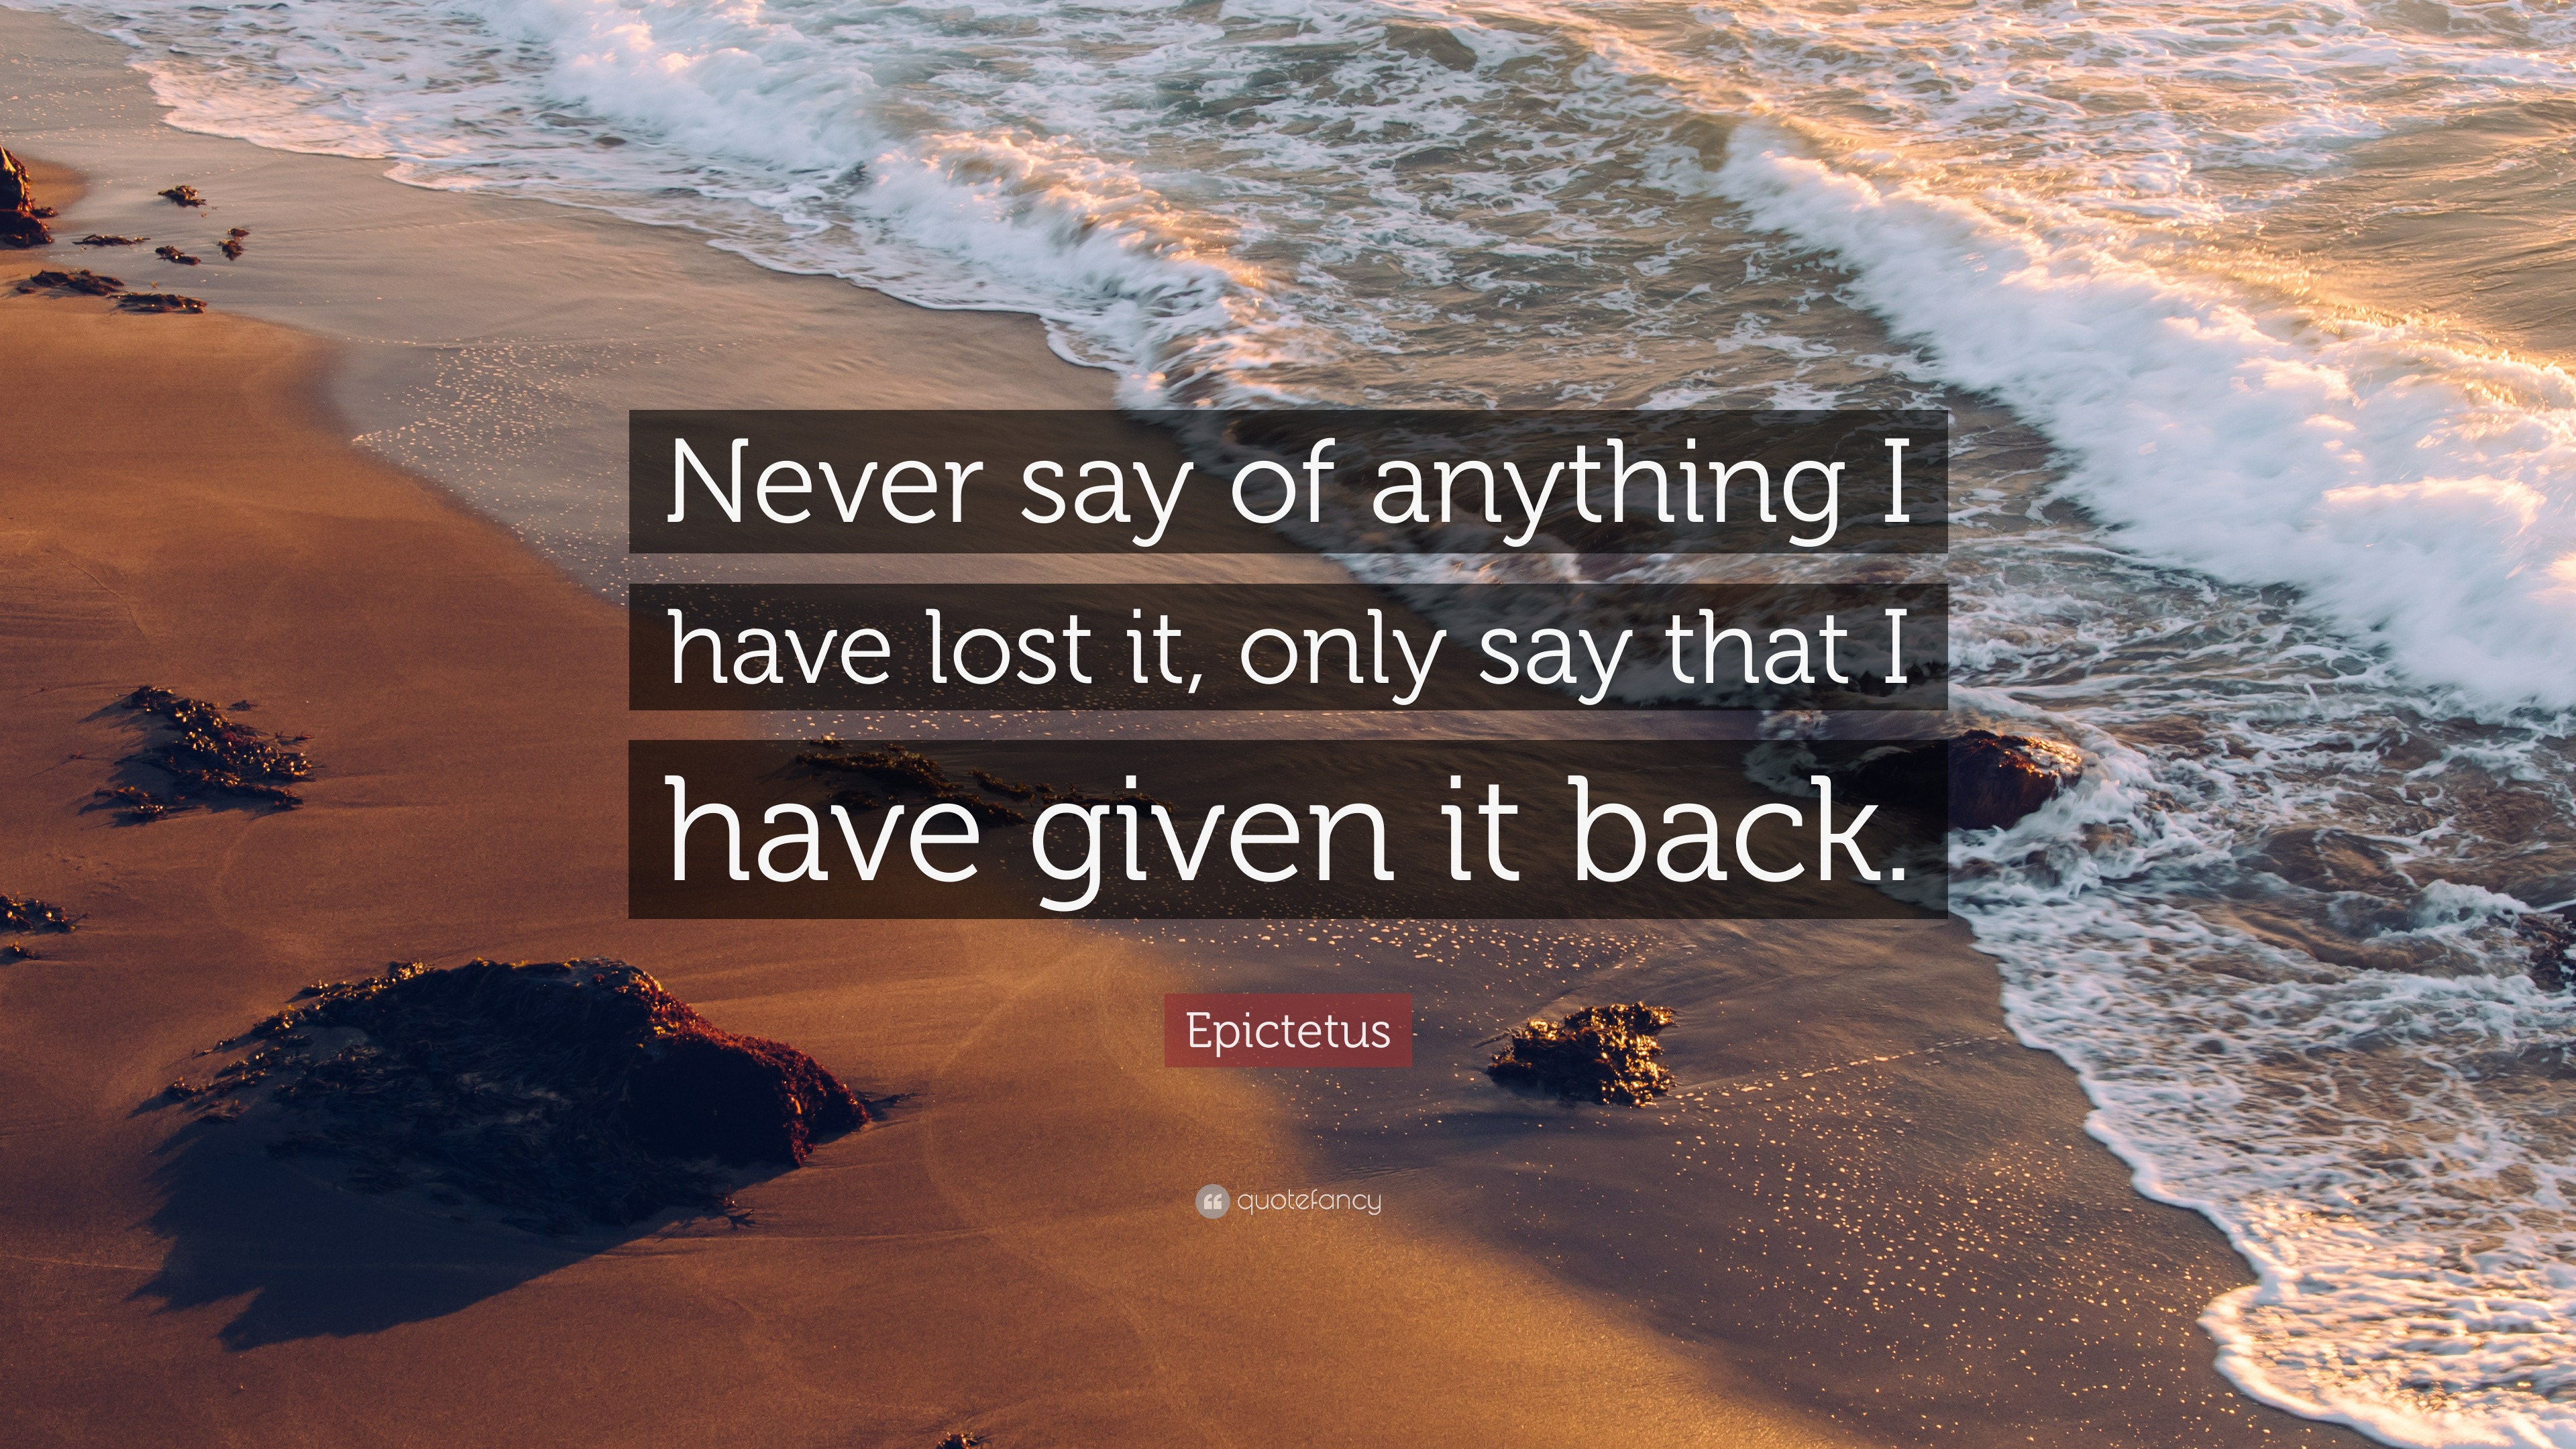 2247102-Epictetus-Quote-Never-say-of-anything-I-have-lost-it-only-say-that.jpg